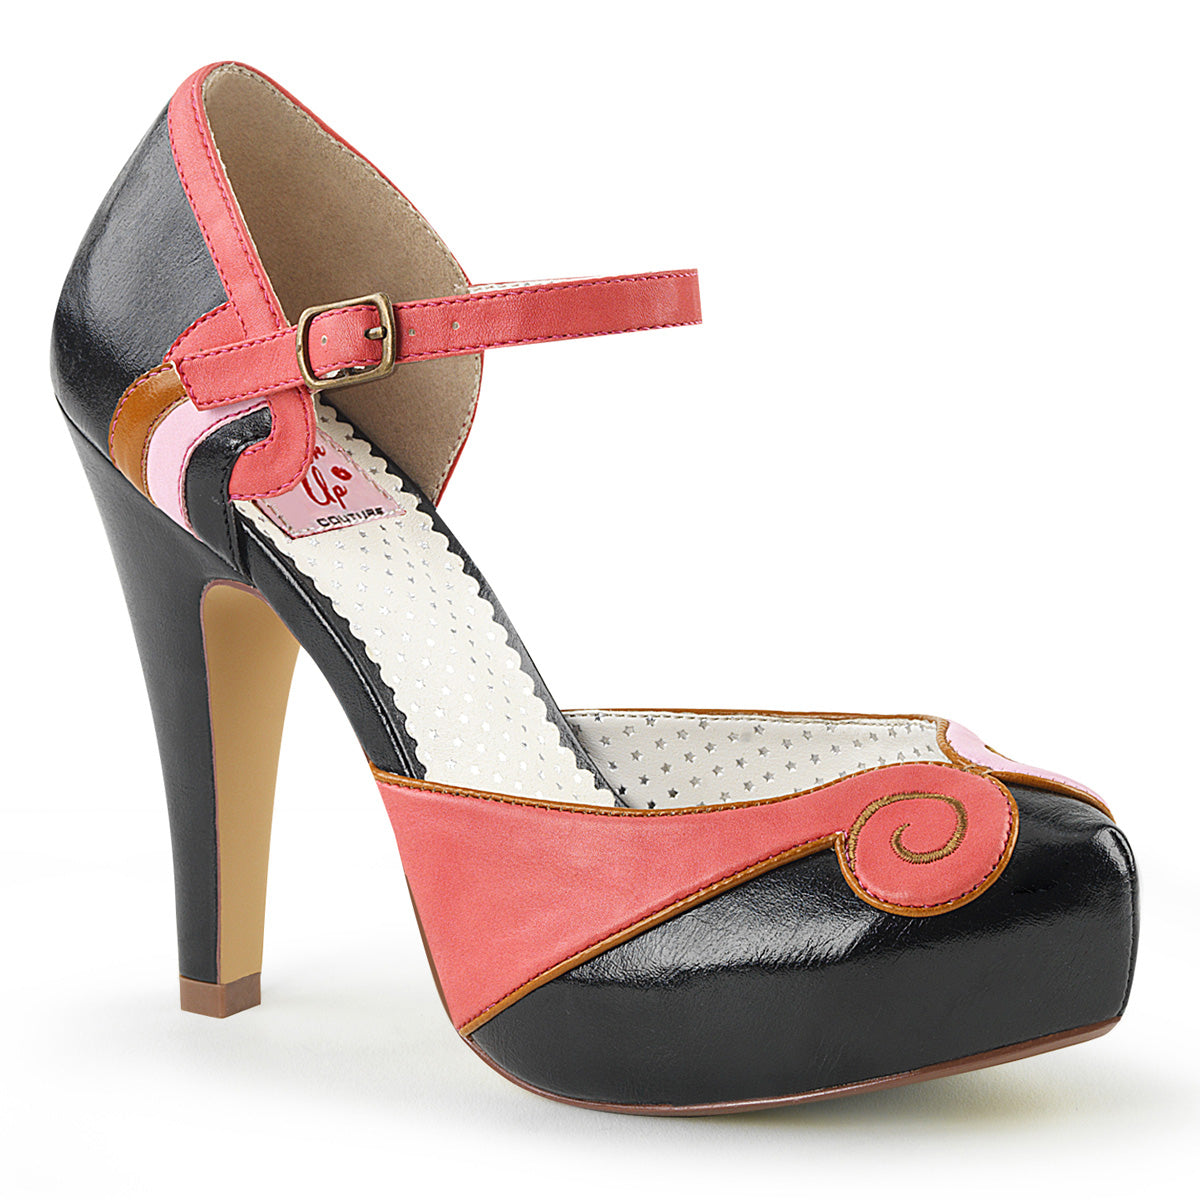 BETTIE-17 Pin Up 4.5" Heel Coral and Black Glamour Platforms